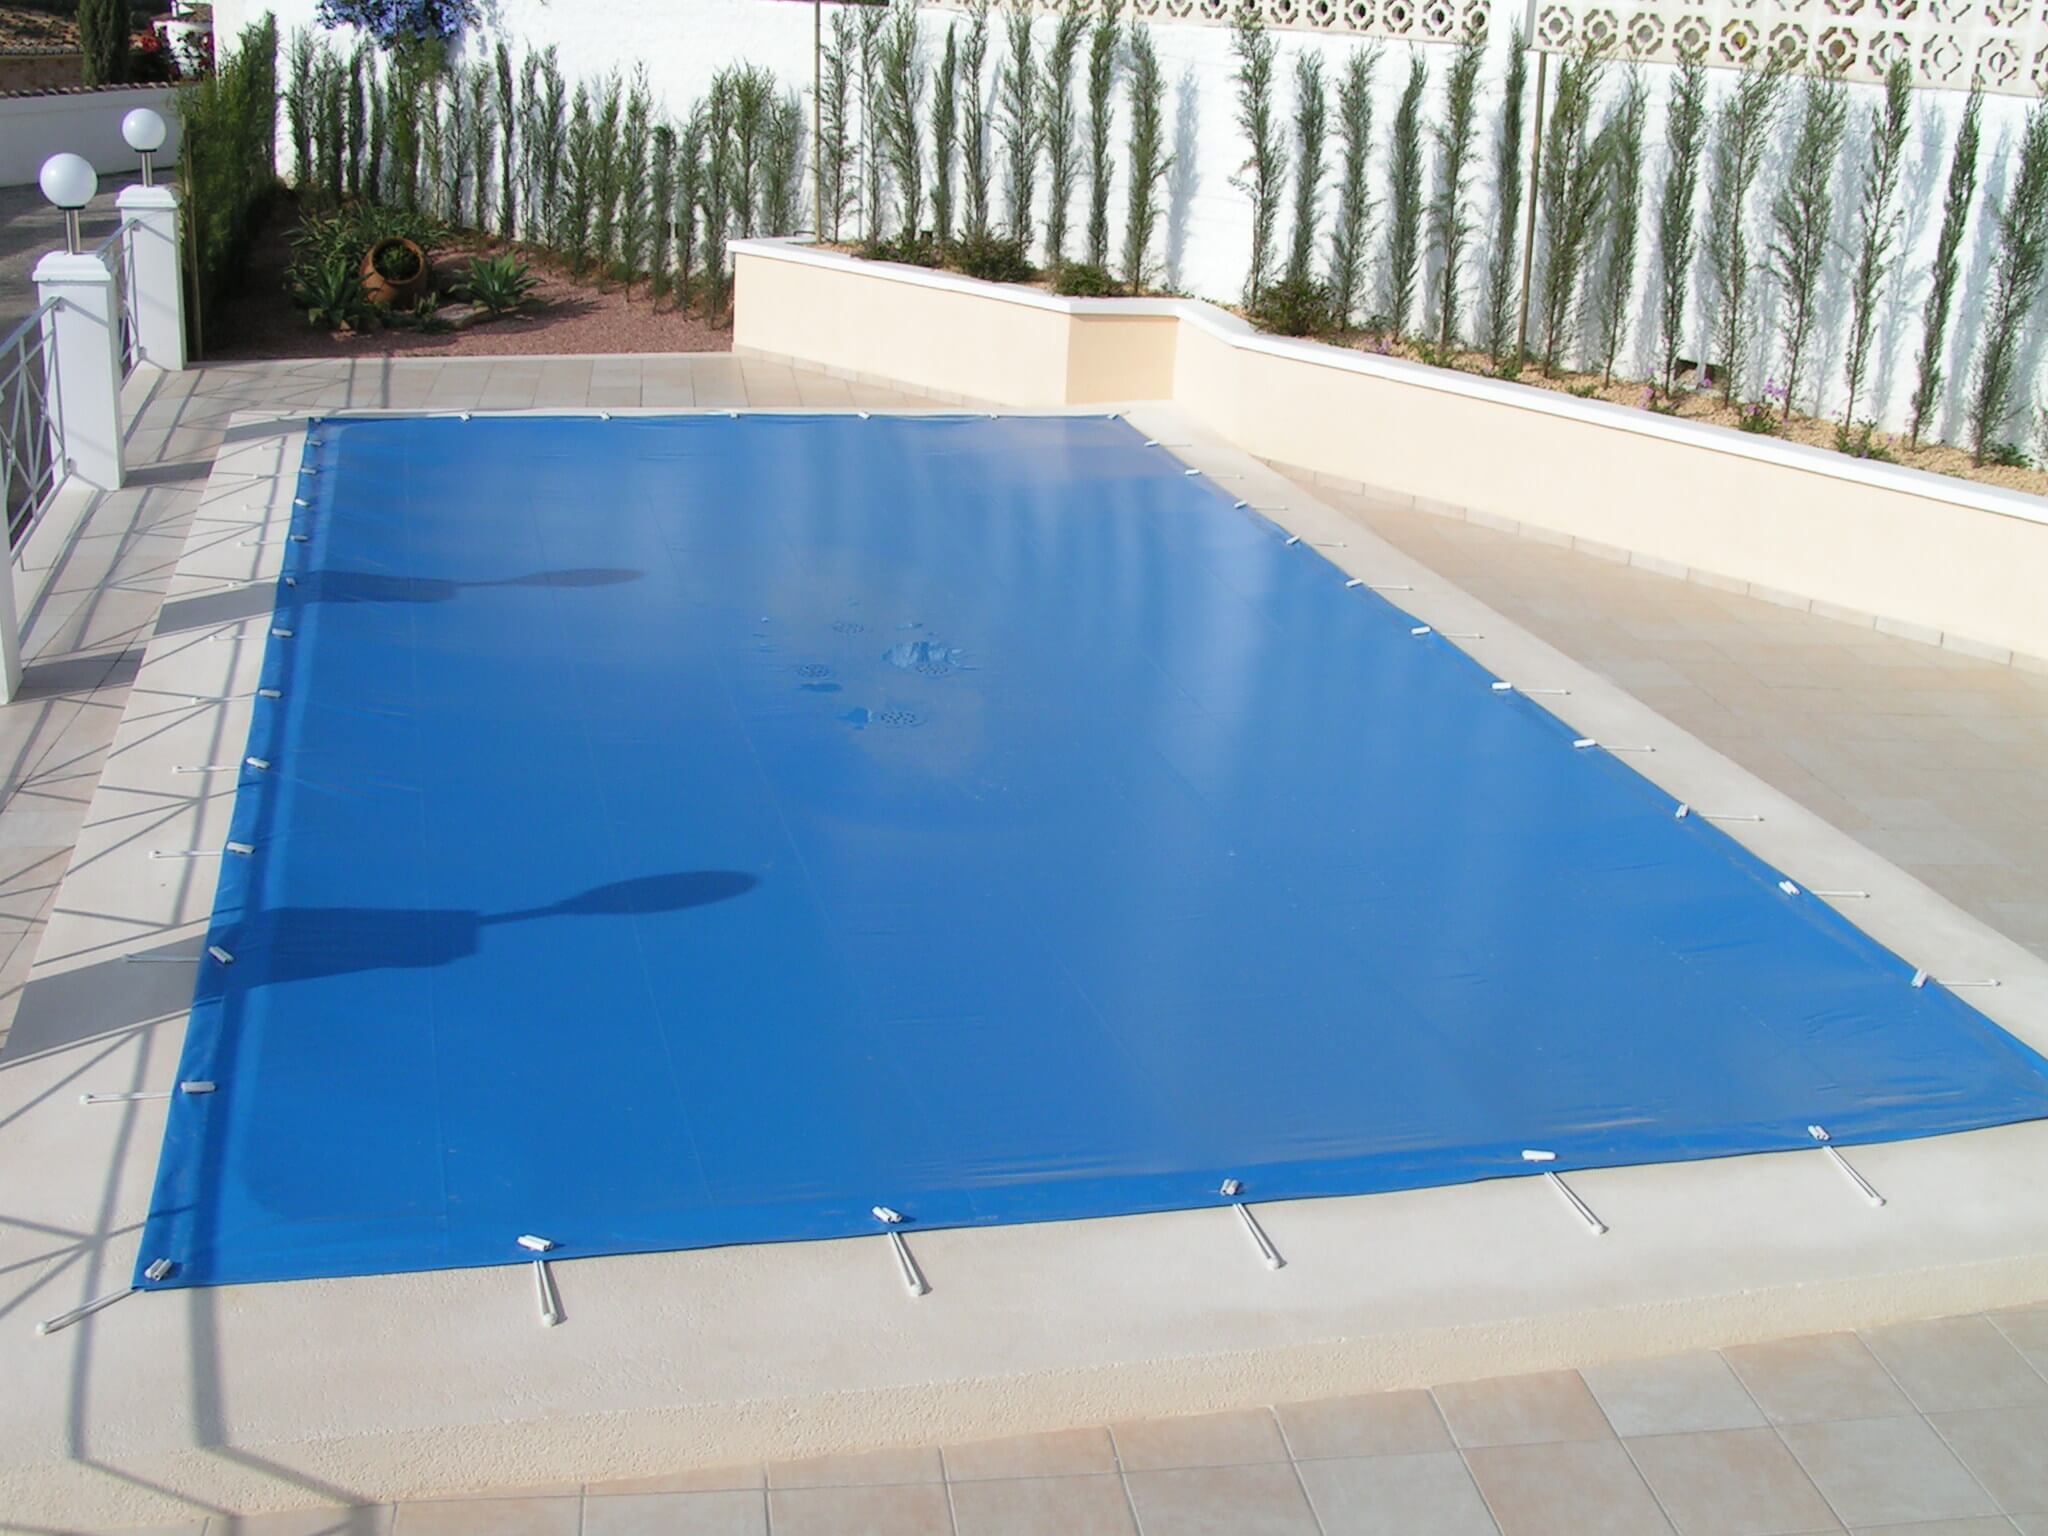 Pool covers are very useful and practical for the summer season